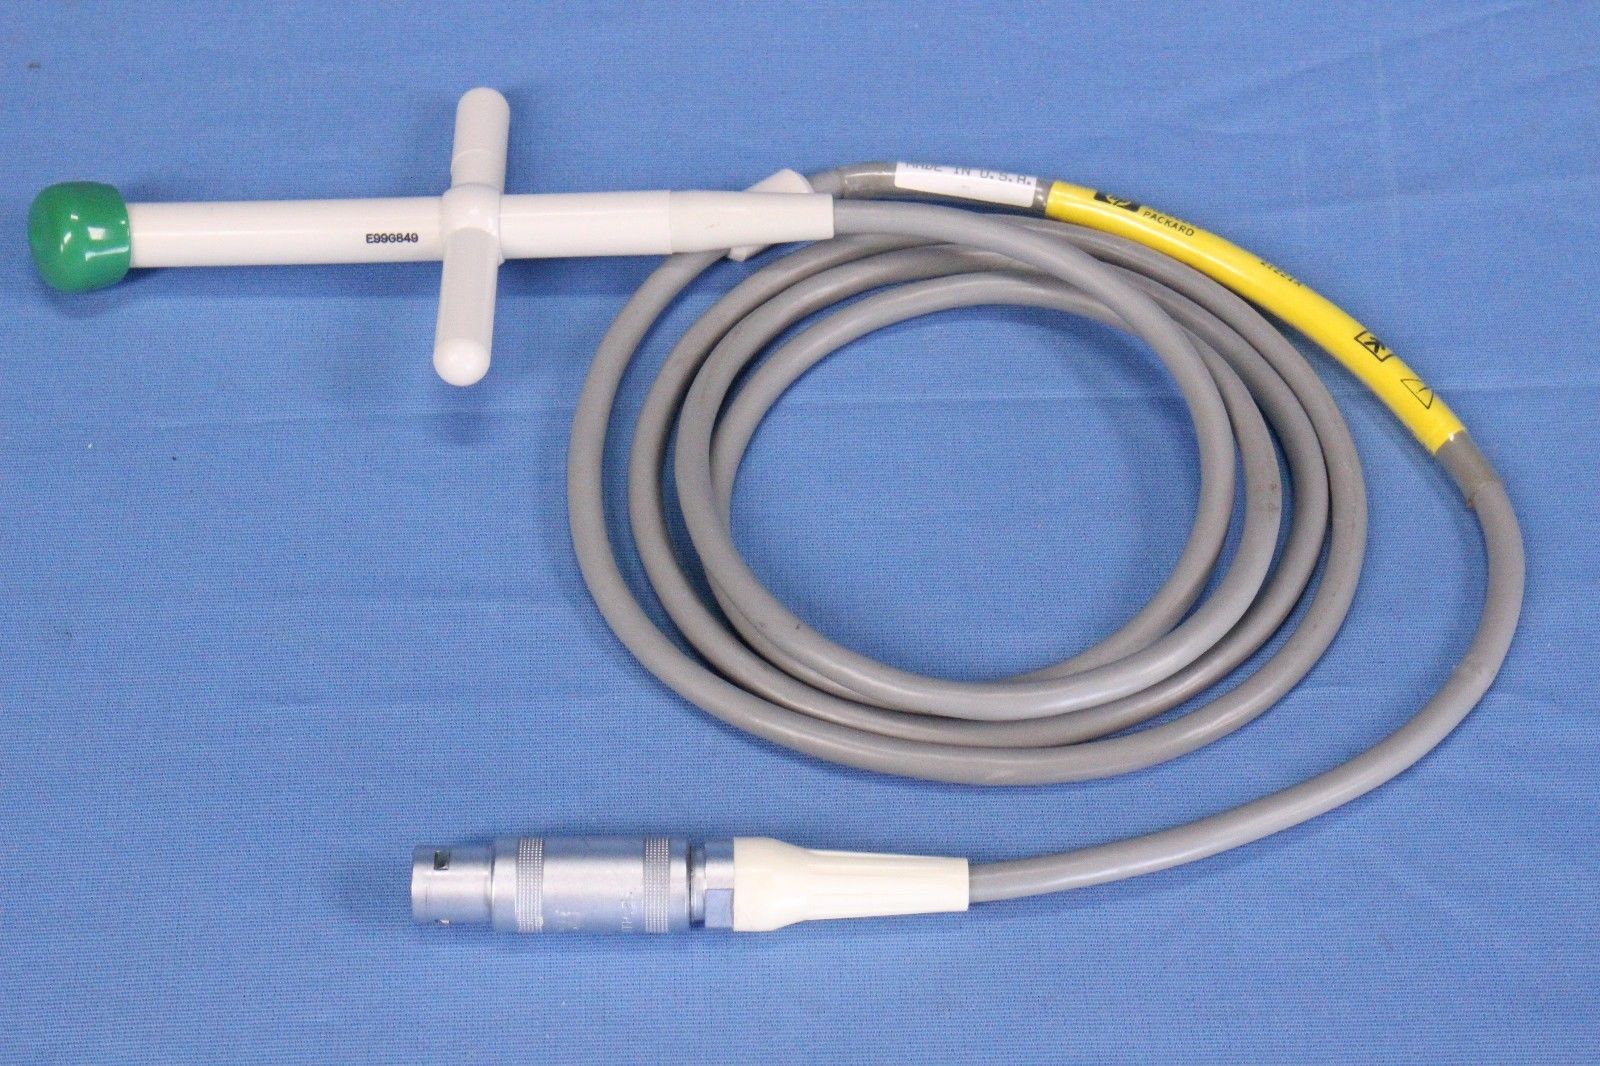 a white and yellow probe connected to a green and white device